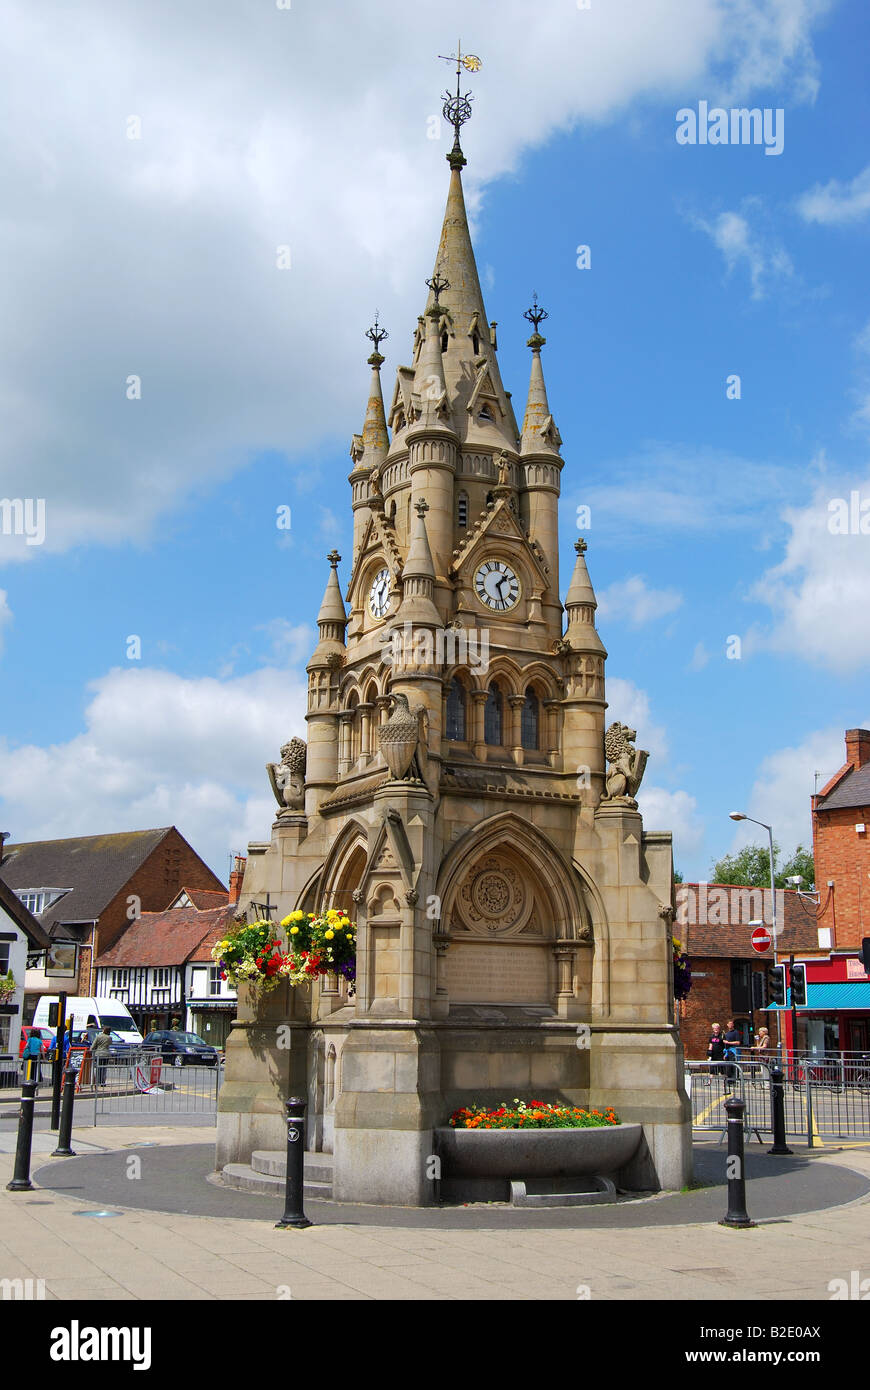 Fontaine américaine victorienne à Market Square, Rother Street, Stratford-upon-Avon, Warwickshire, Angleterre, Royaume-Uni Banque D'Images